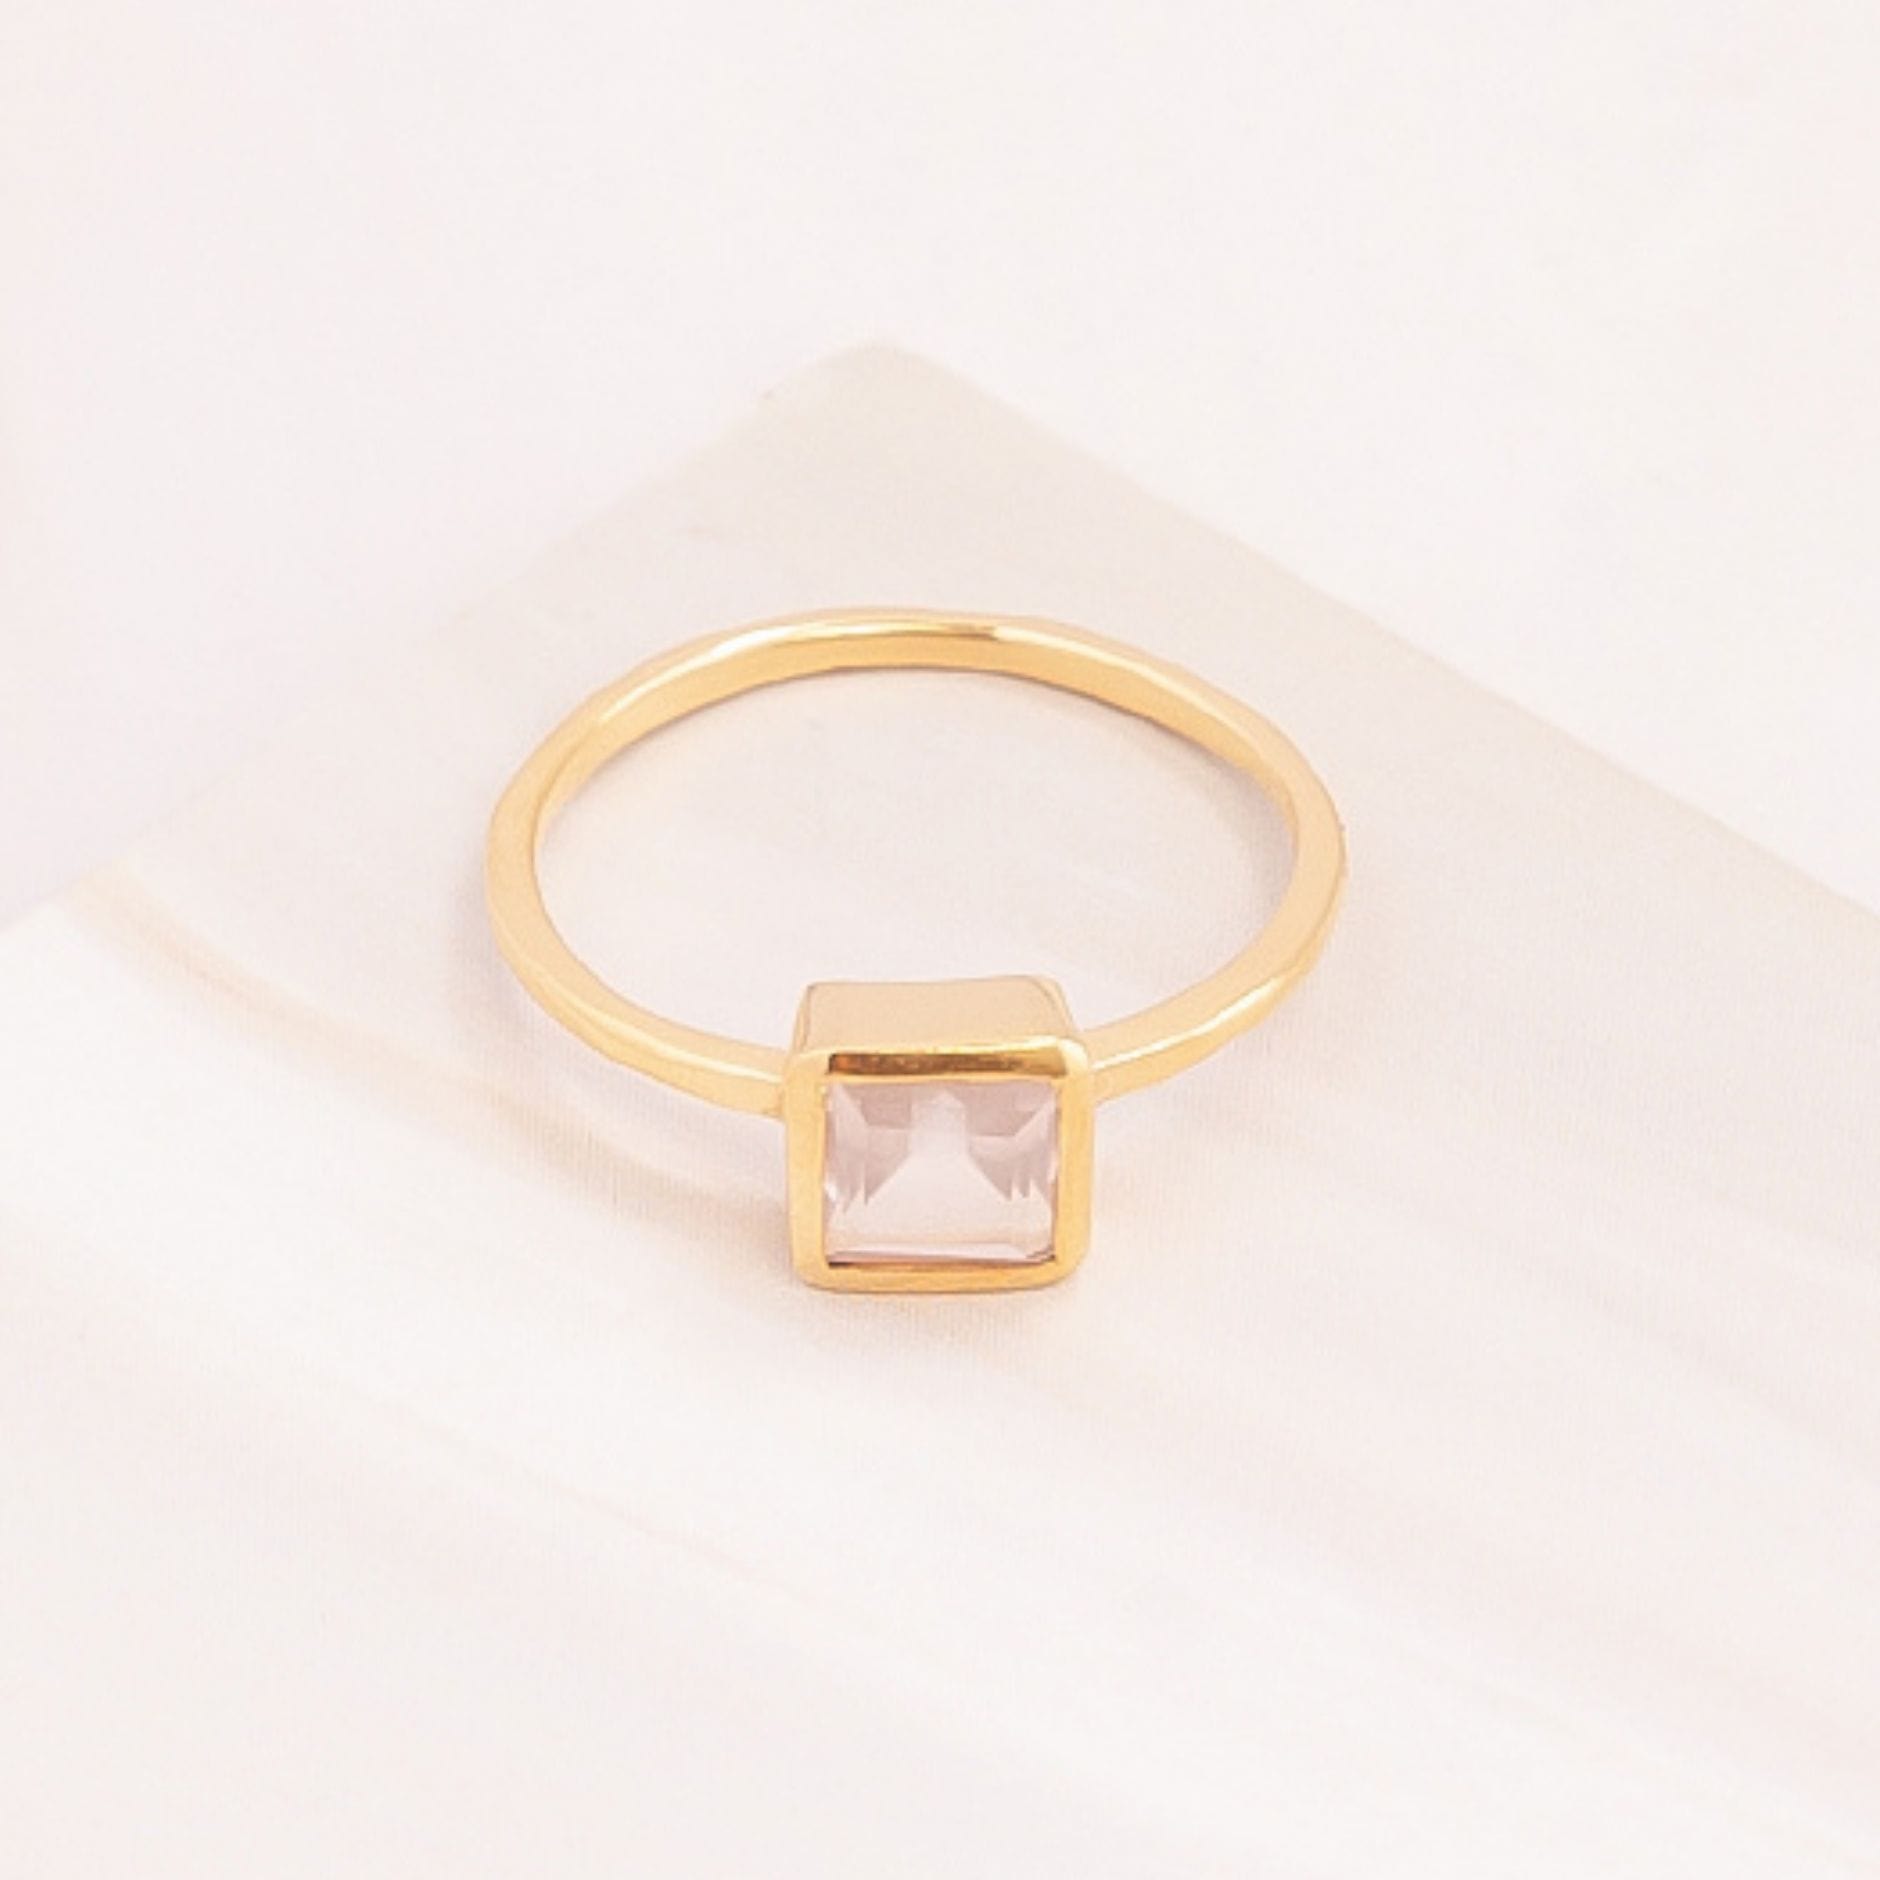 Emblem Jewelry Rings Rose Quartz / Square Signature Candy Gemstone Stack Rings (Ring Size 6)